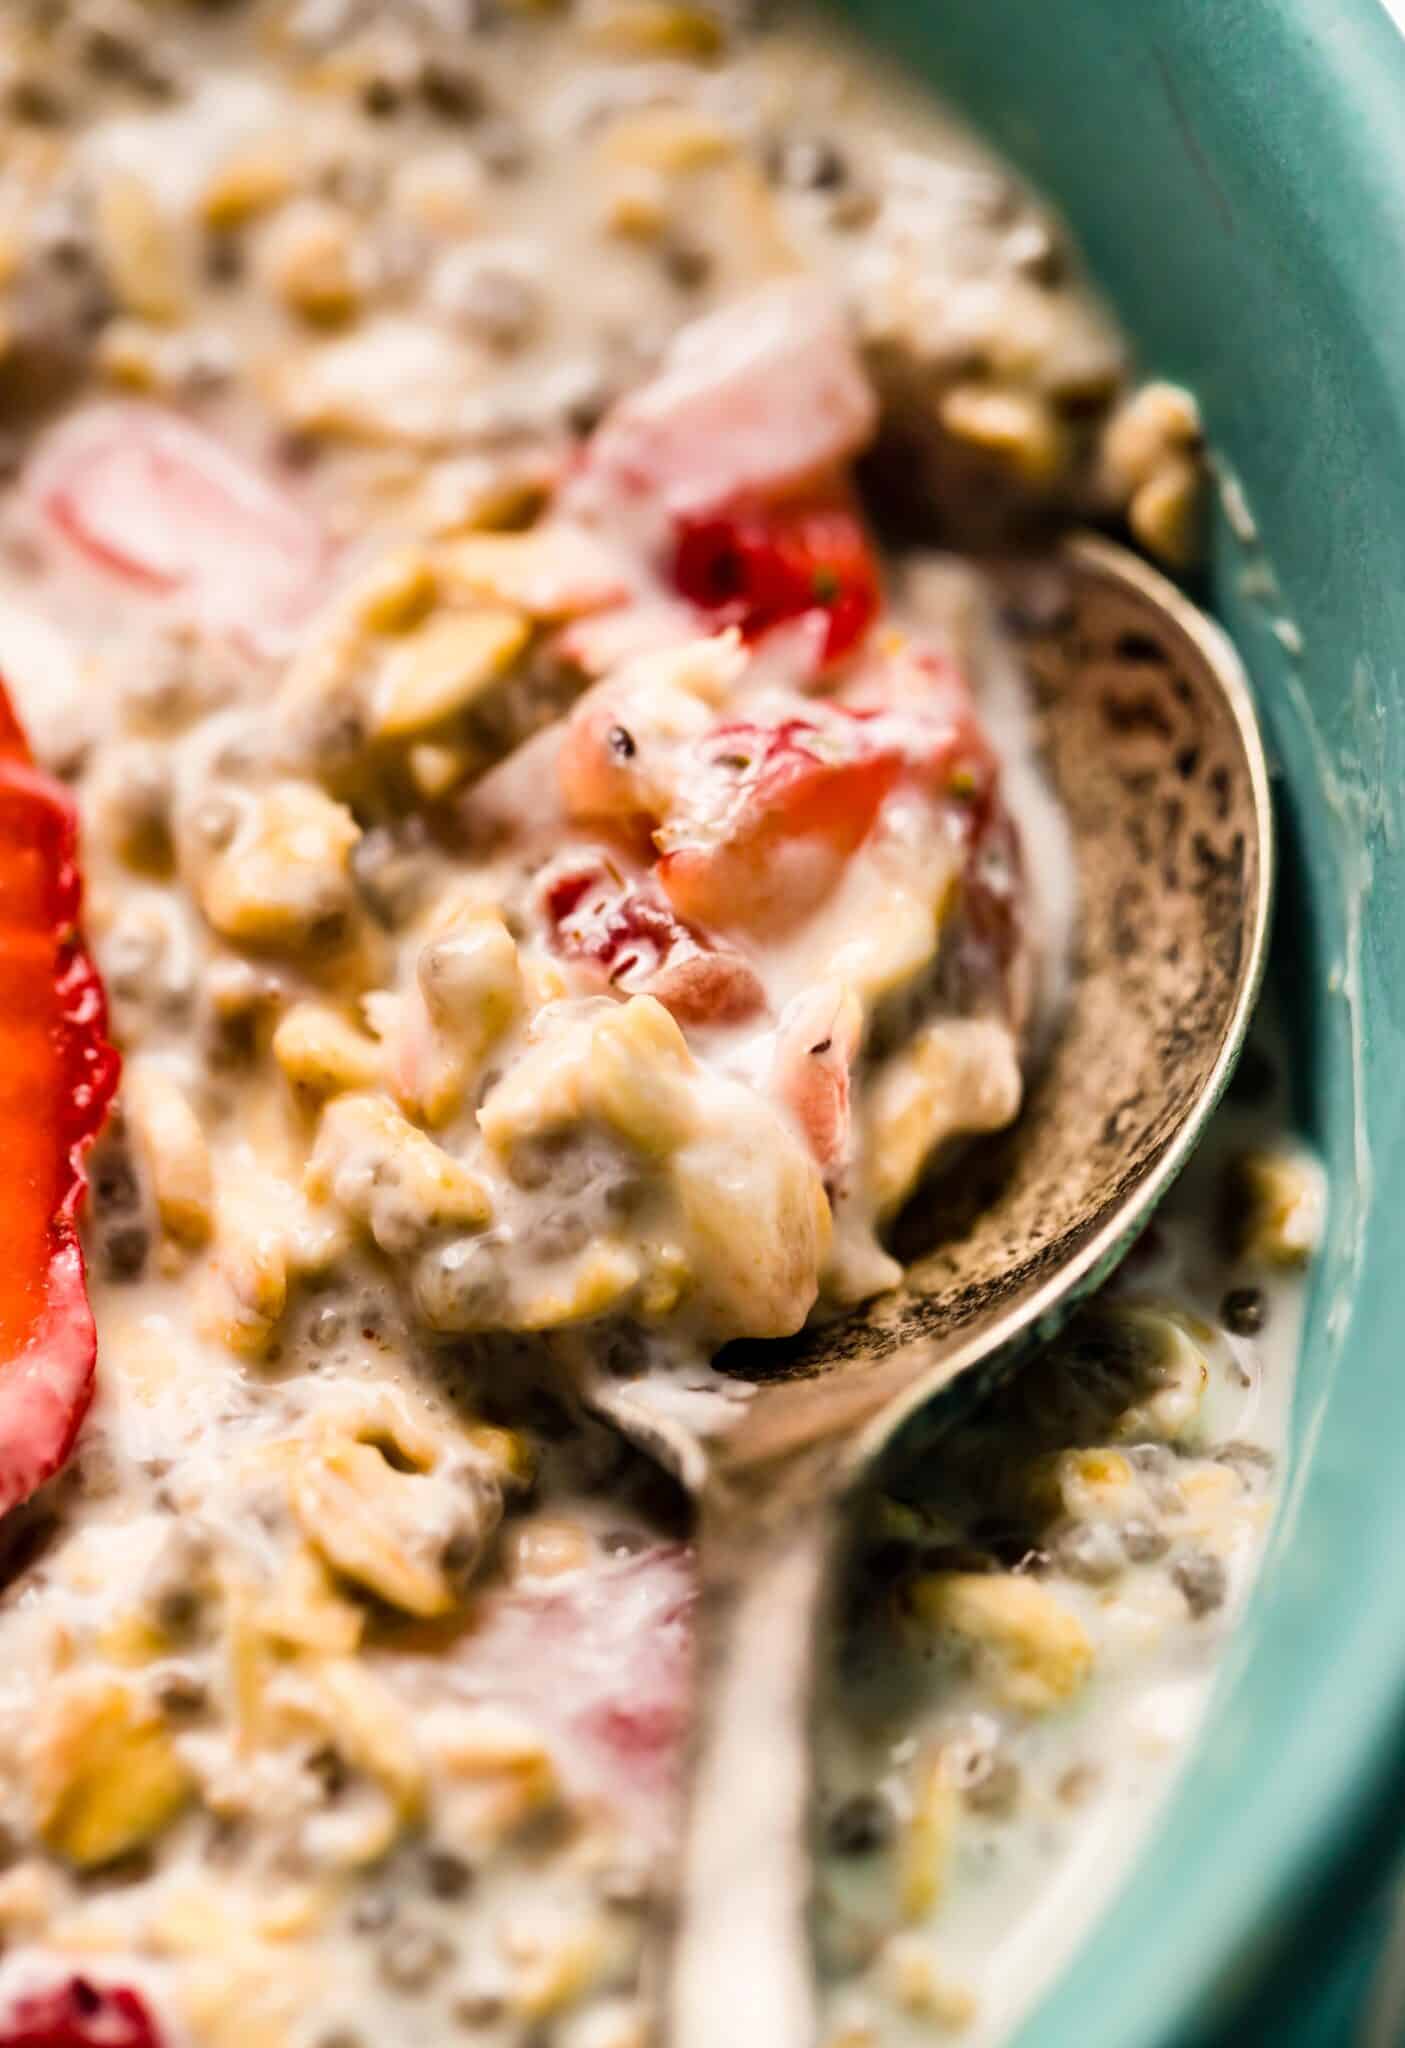 Up close photo of a spoon in strawberry overnight oats with chia seeds.